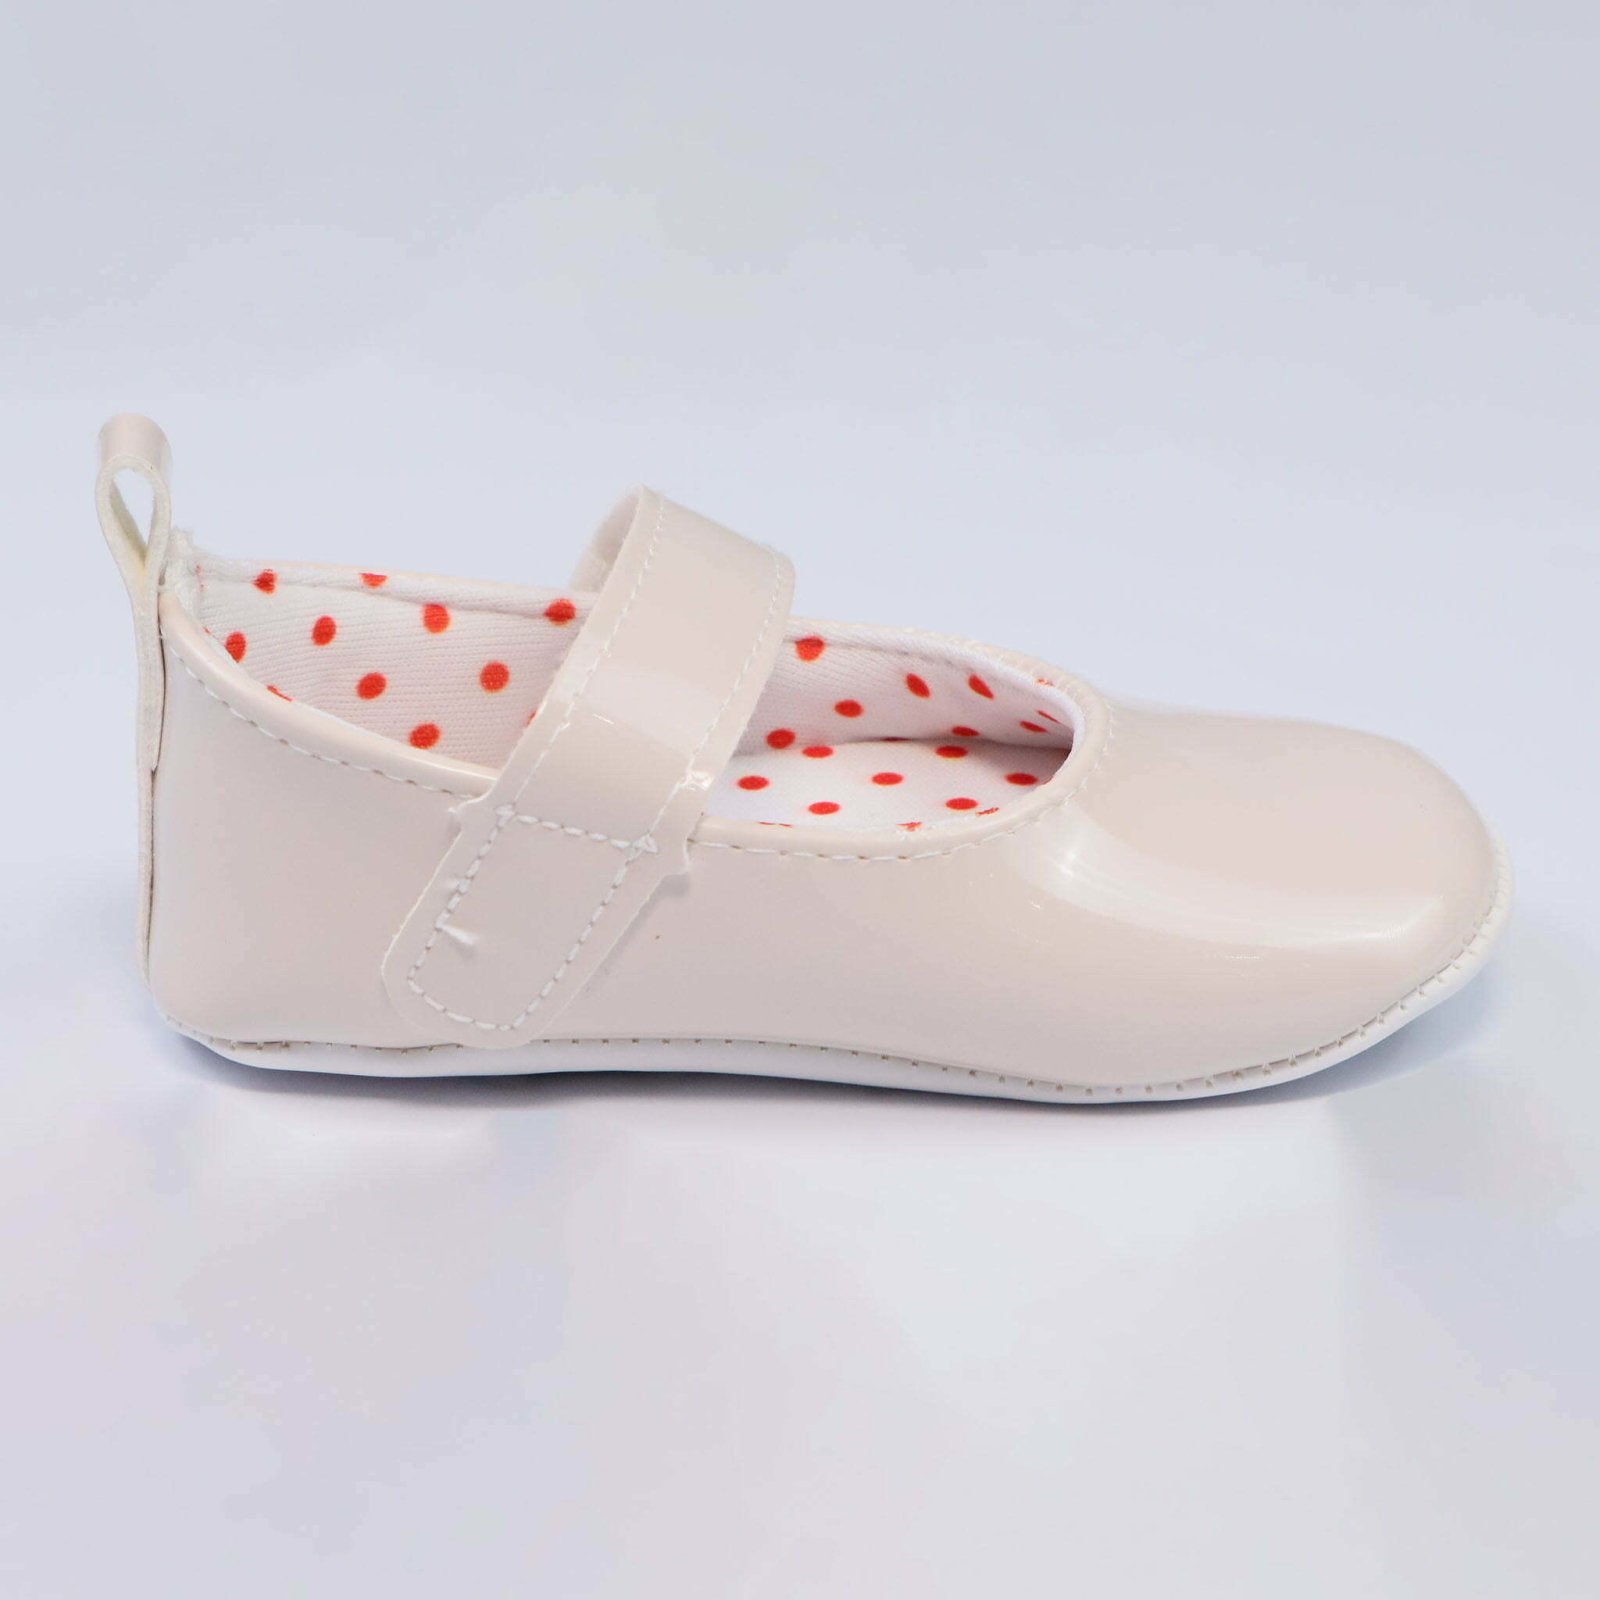 Baby Shoes Dot Print by Baby Pattini